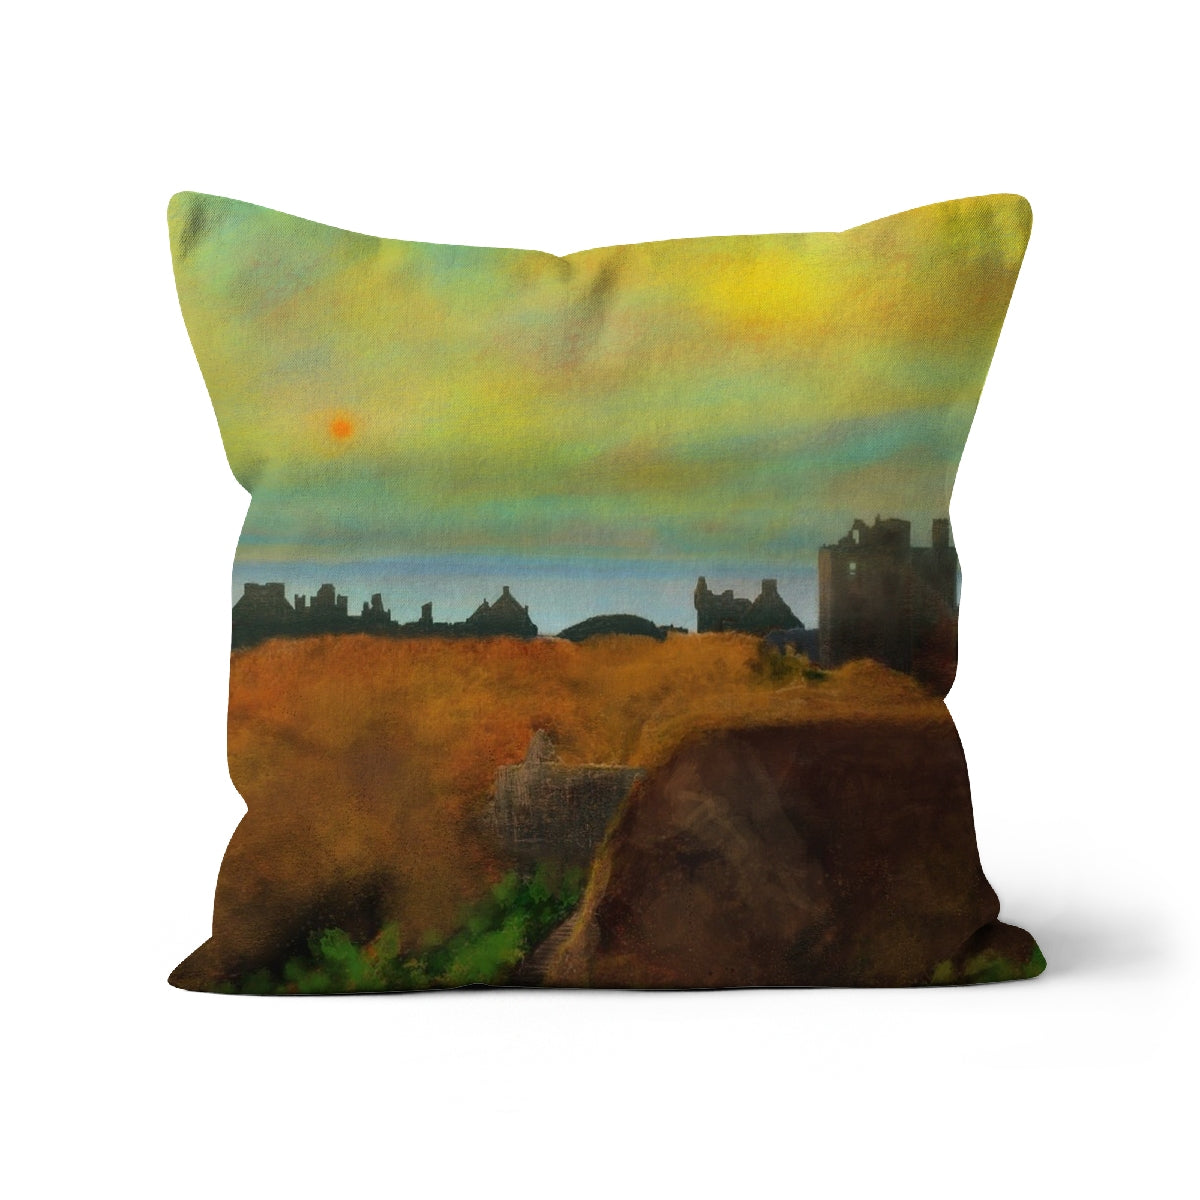 Dunnottar Castle Art Gifts Cushion-Cushions-Historic & Iconic Scotland Art Gallery-Linen-18"x18"-Paintings, Prints, Homeware, Art Gifts From Scotland By Scottish Artist Kevin Hunter